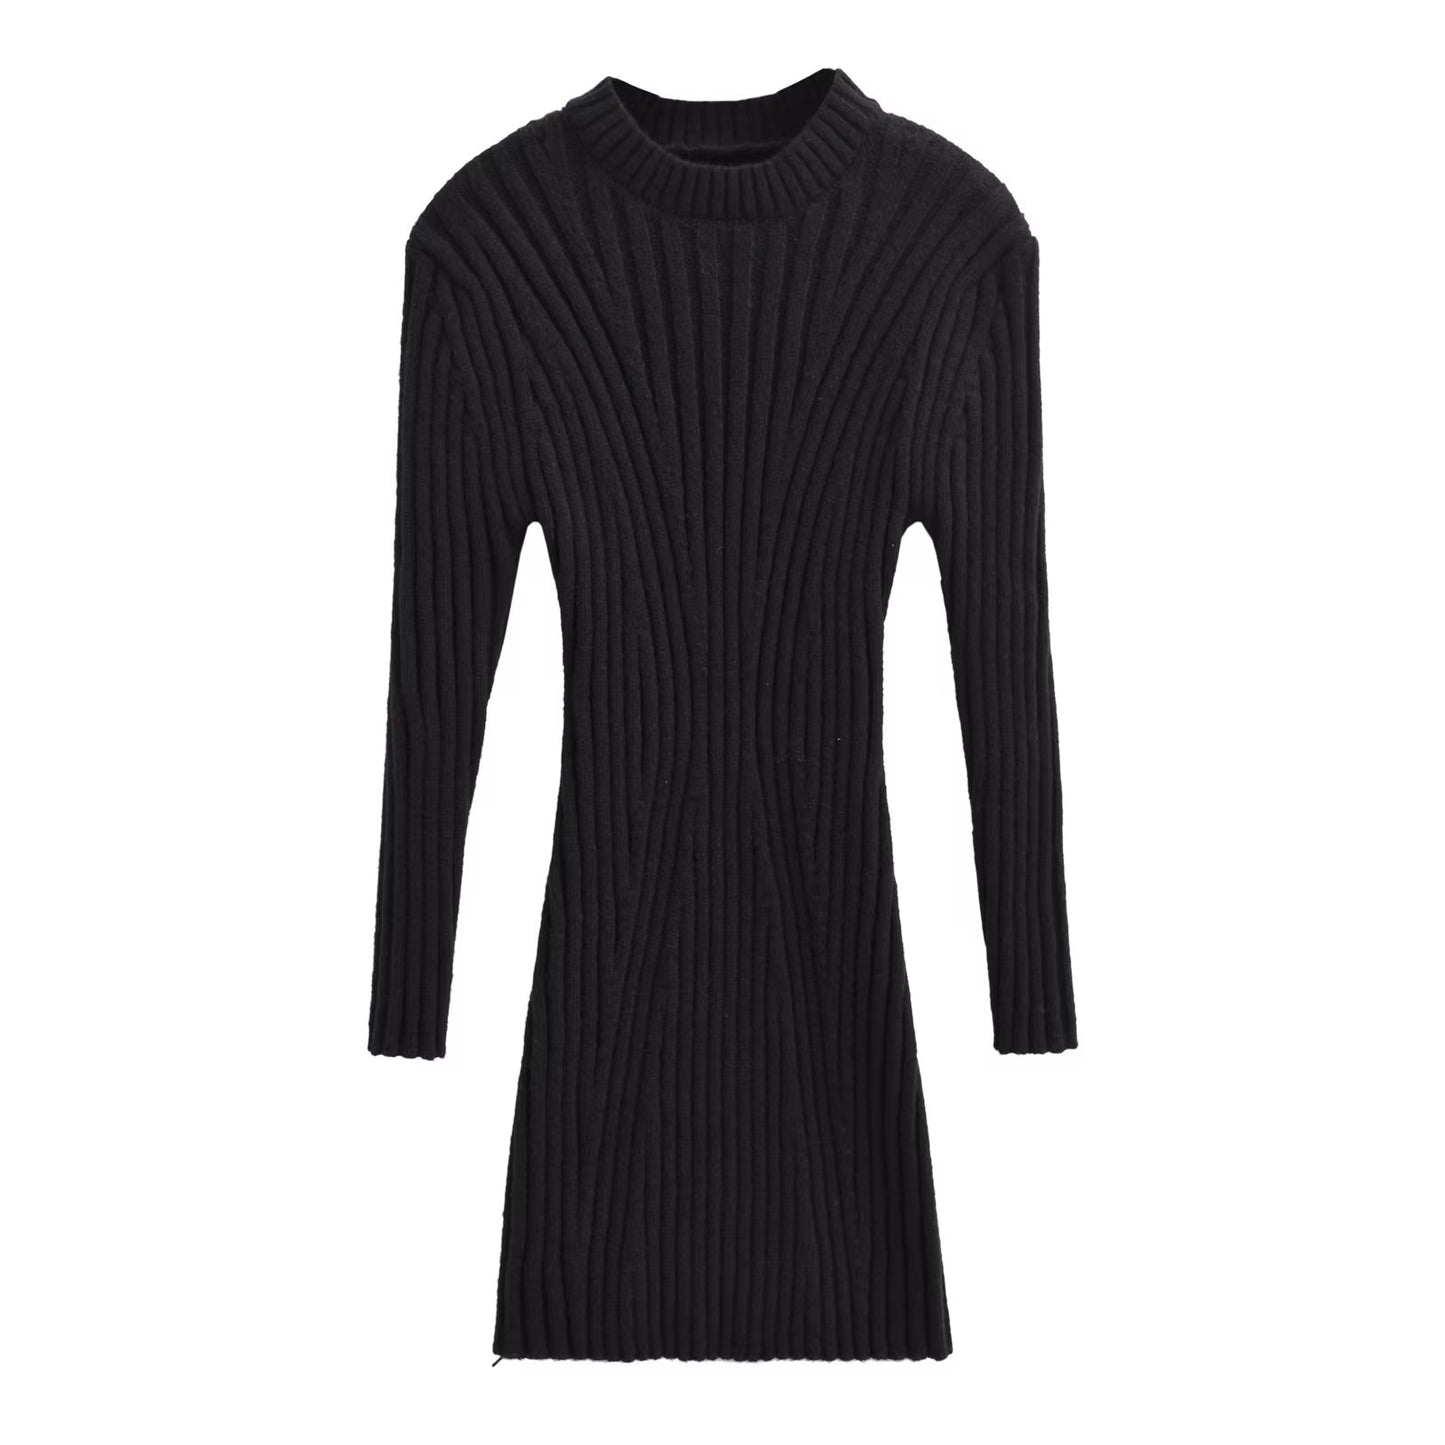 Sexy Knitted Hollow Out Cutout Core Spun Yarn Bottoming Slimming Dress